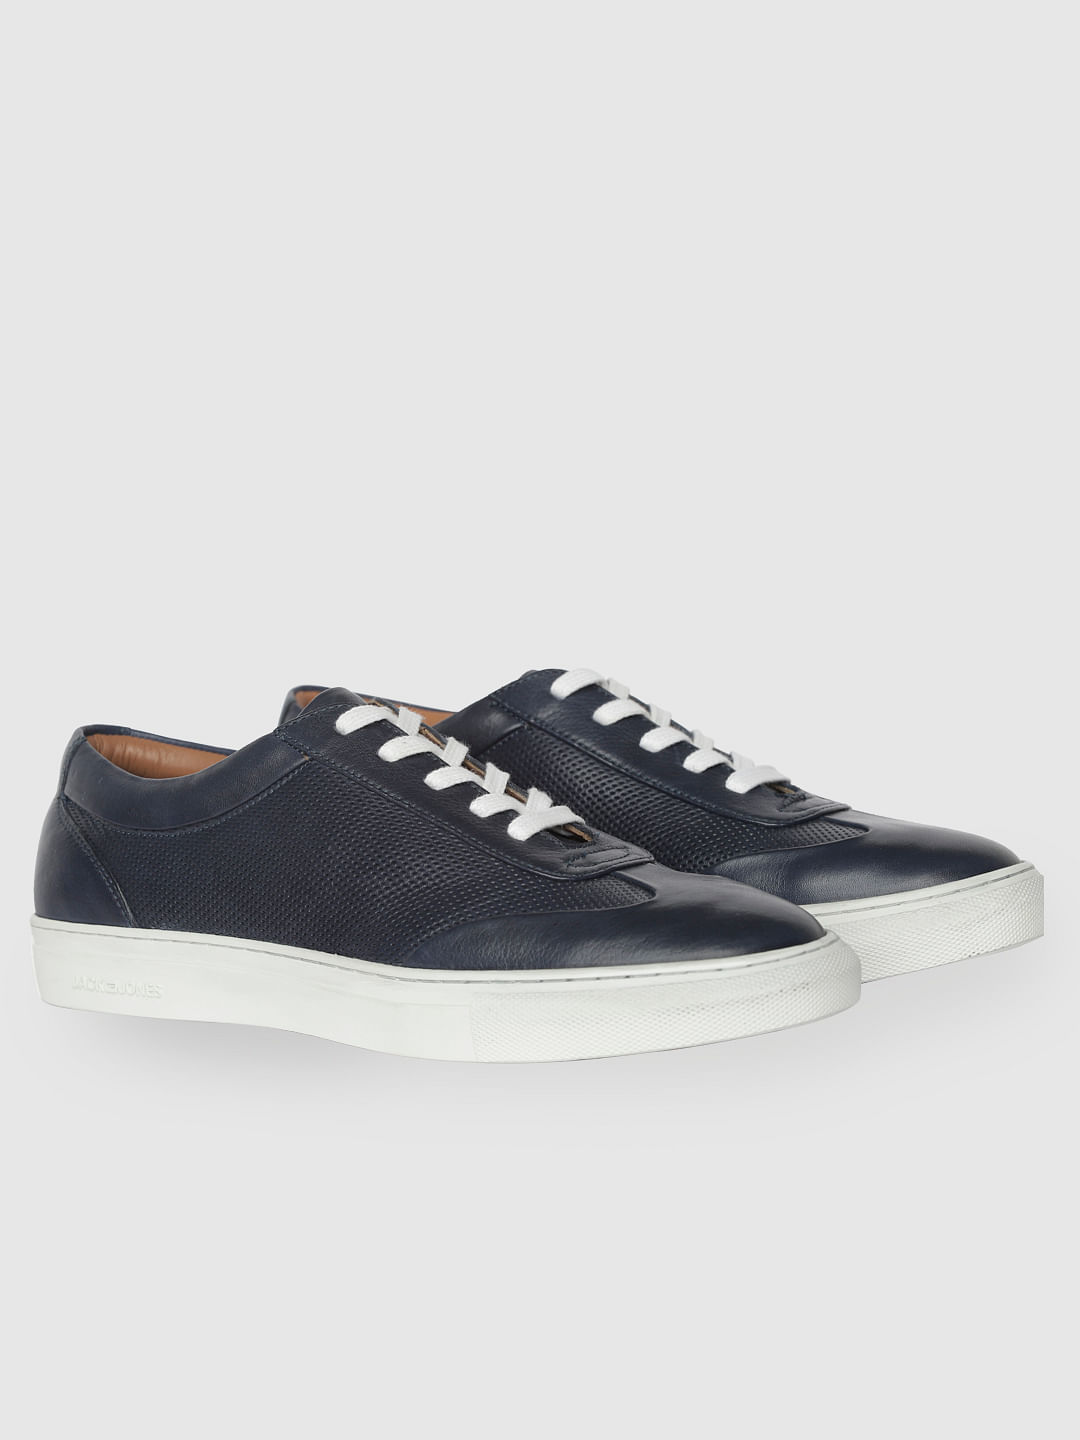 navy blue leather sneakers mens